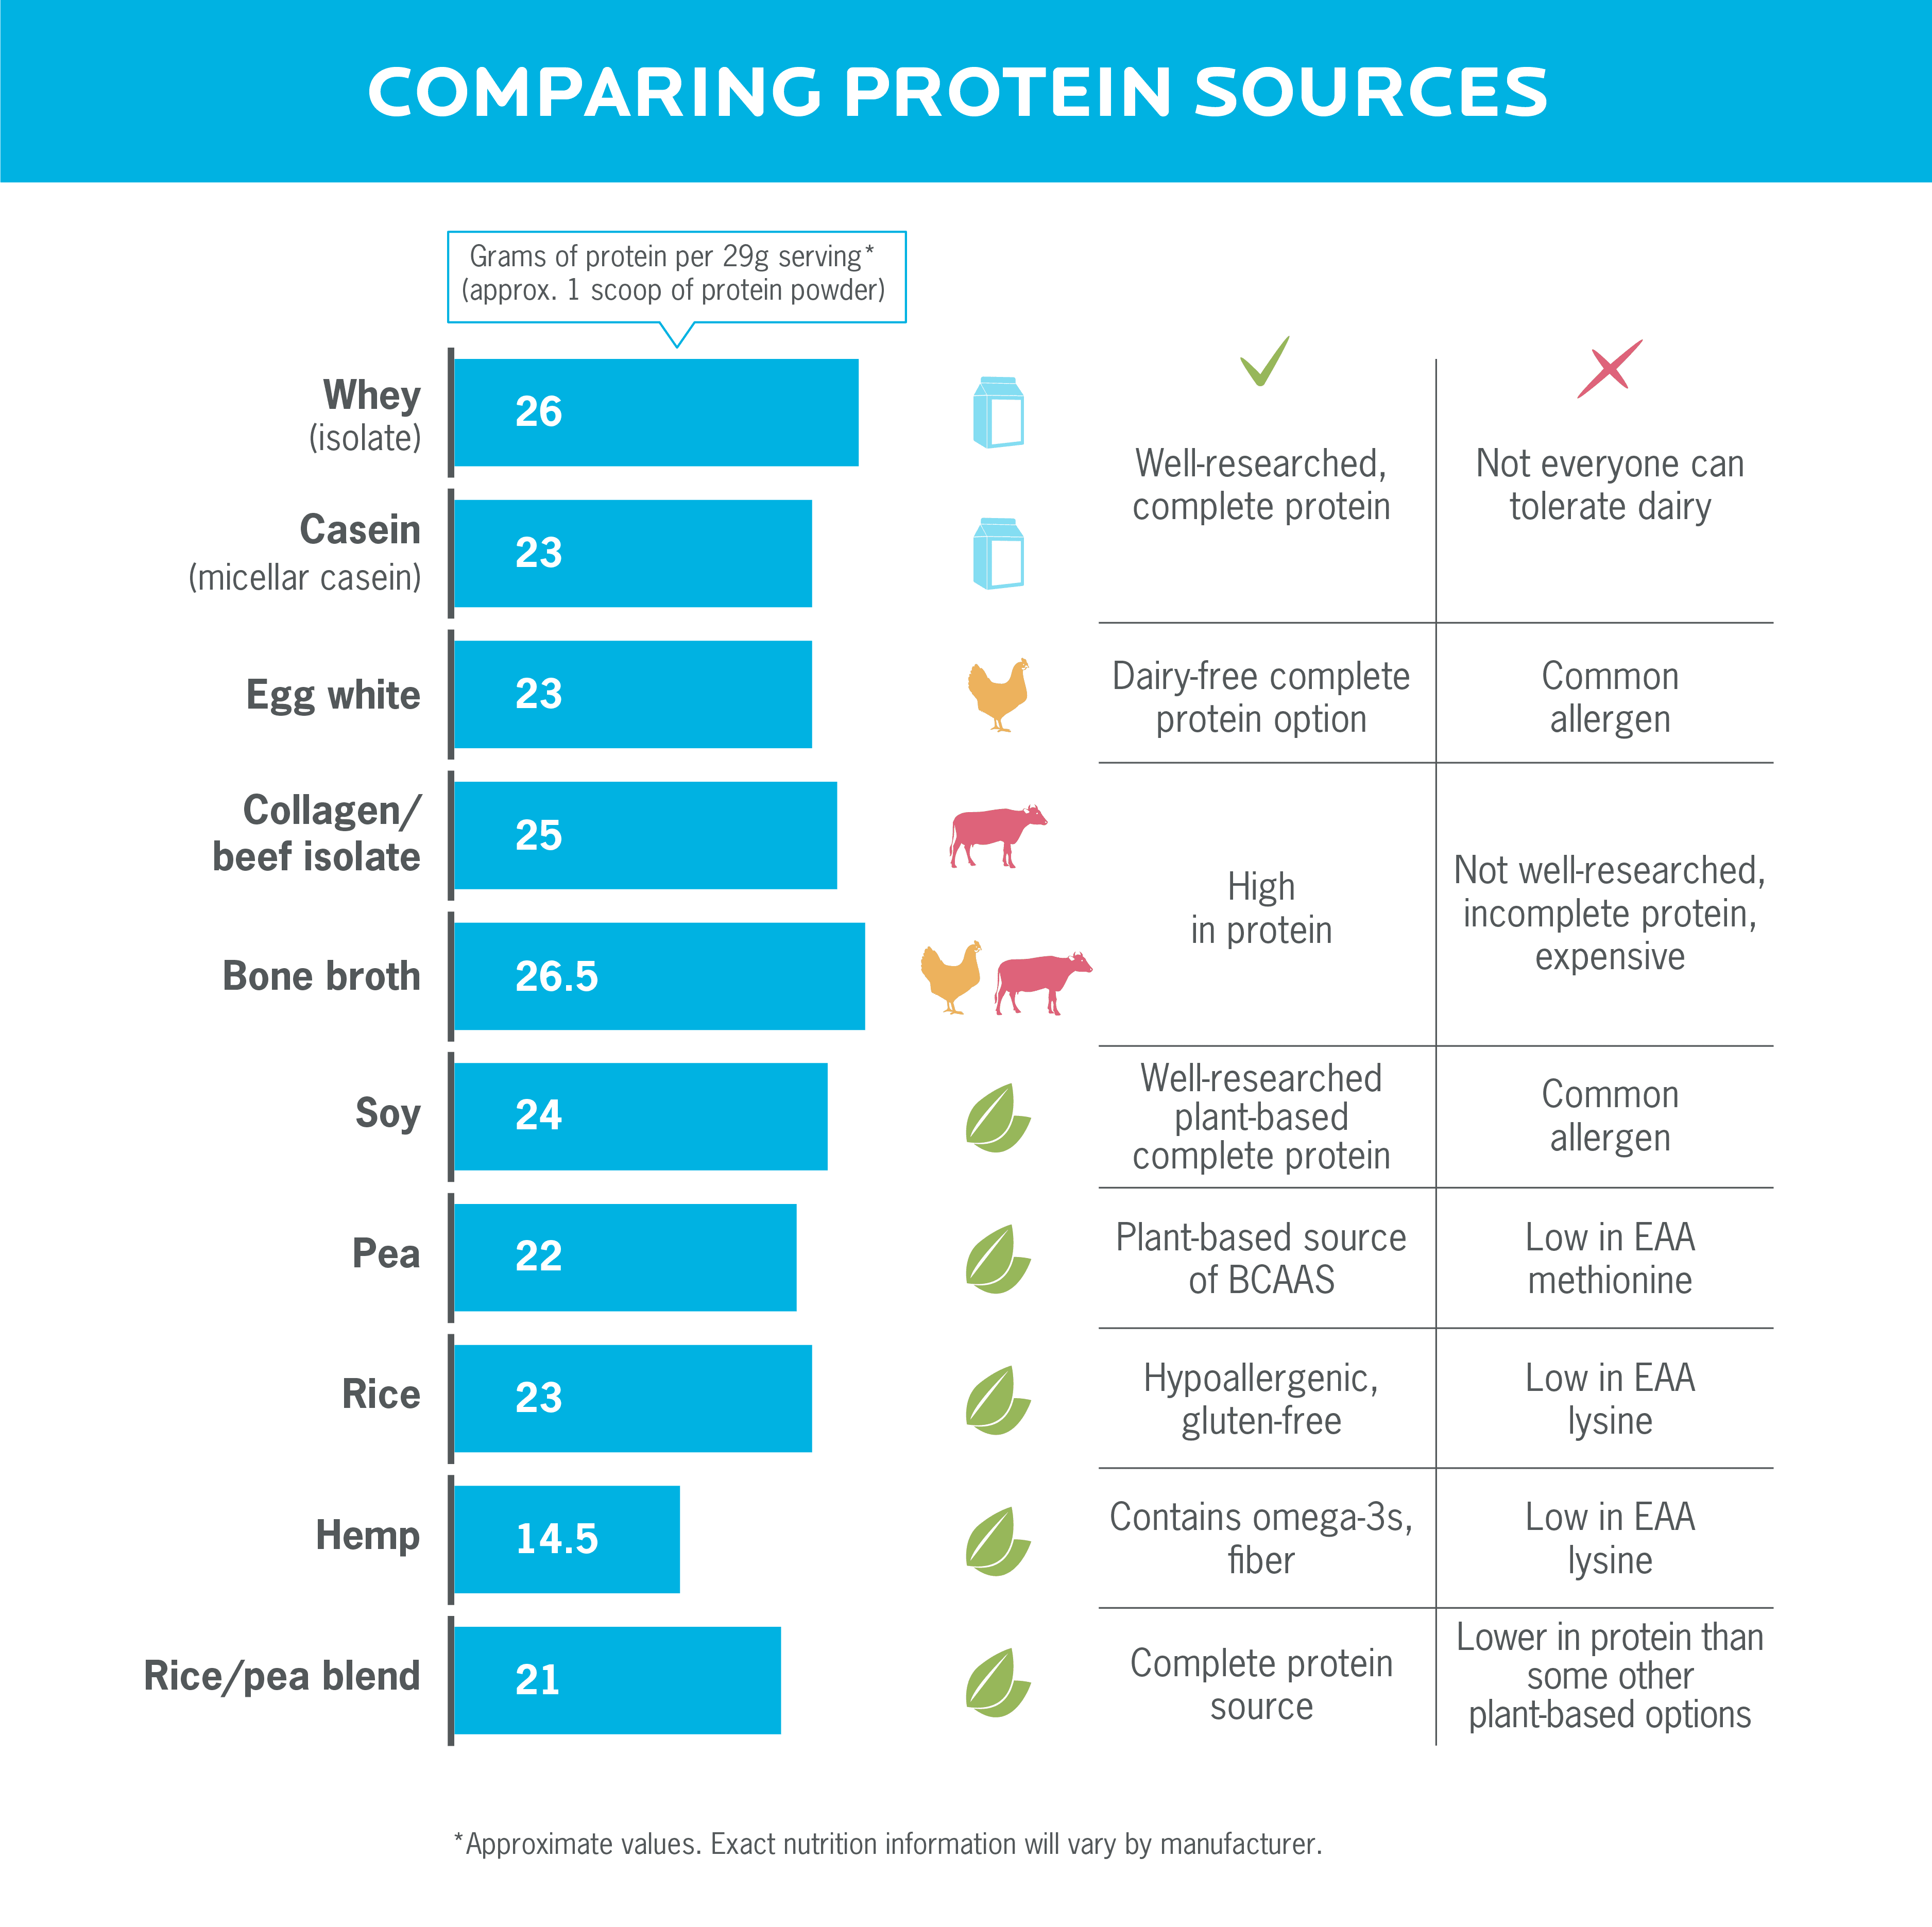 How to choose the best protein powder: A guide from Precision Nutrition